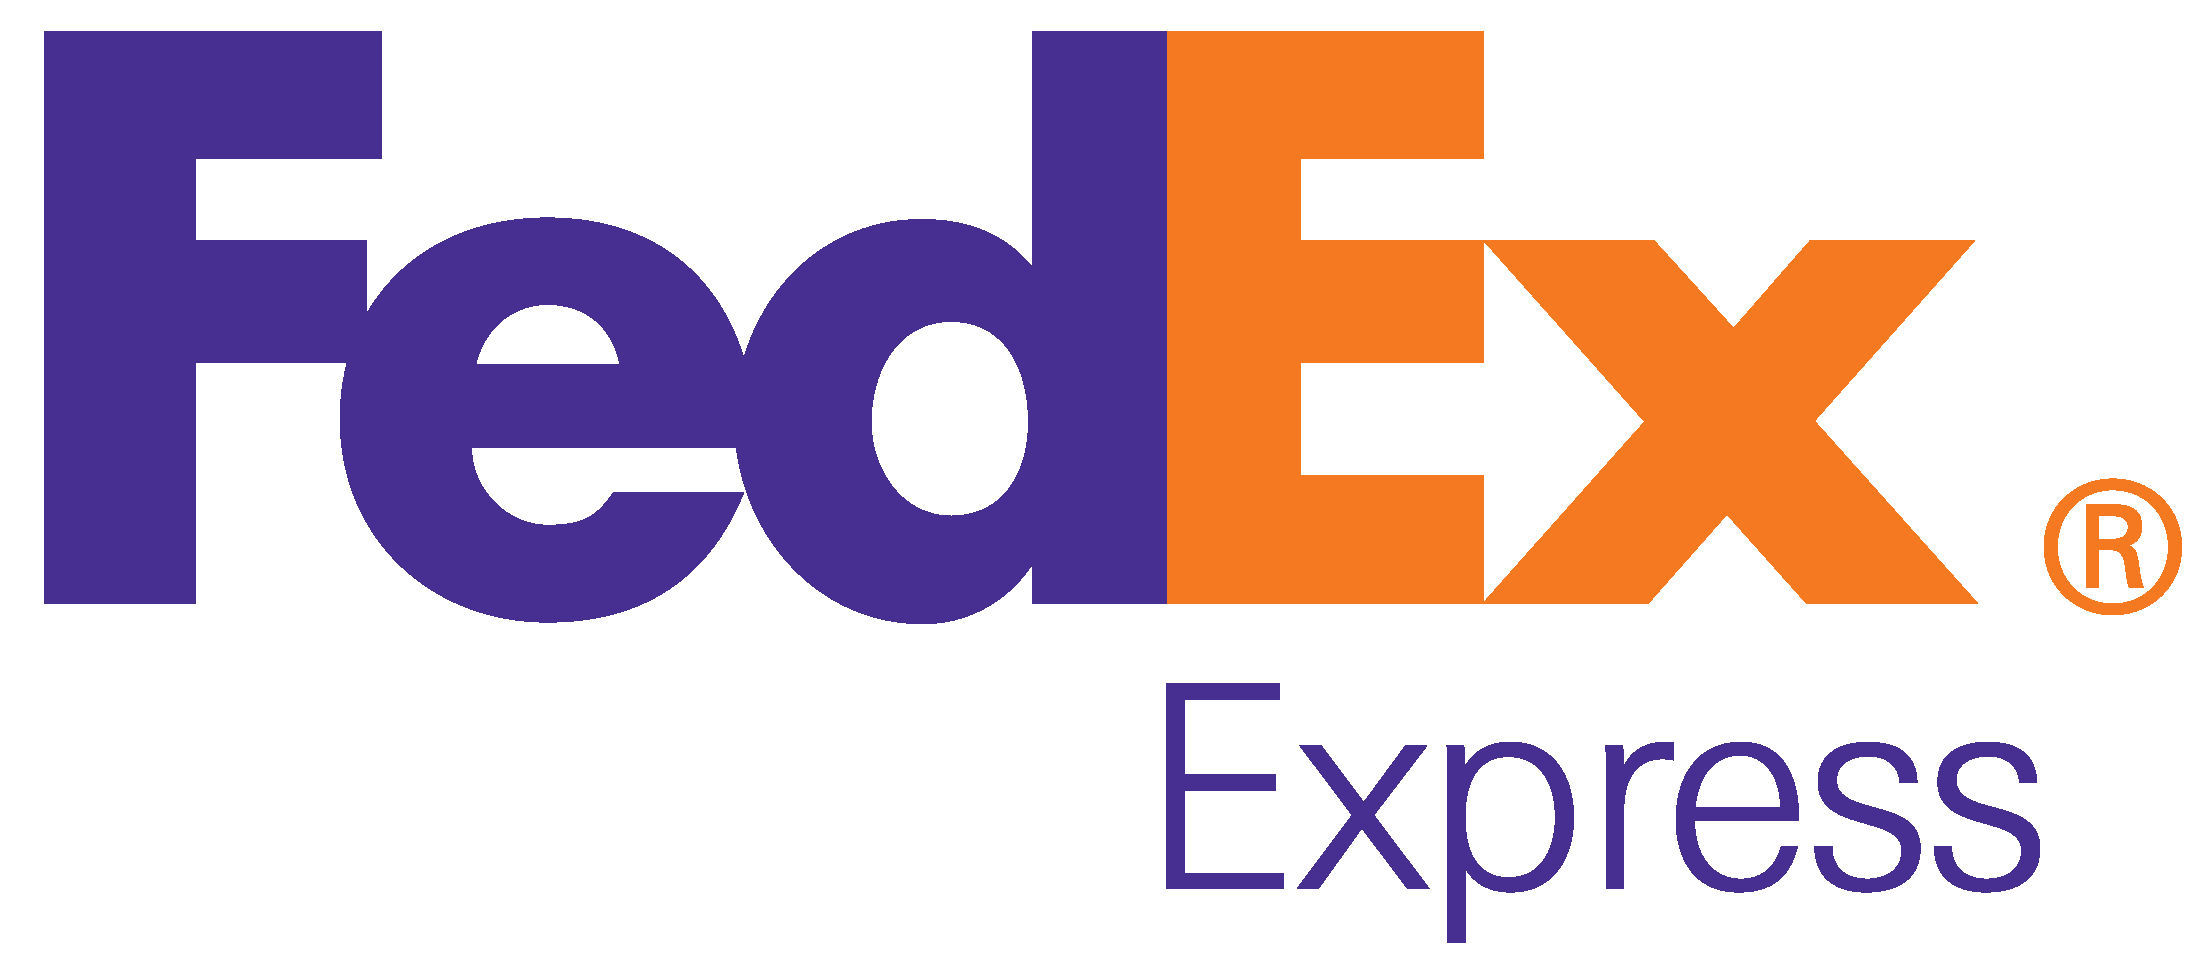 Federal Express Old Logo - Fed Ex not only upgraded big time in comparison to their old logo ...